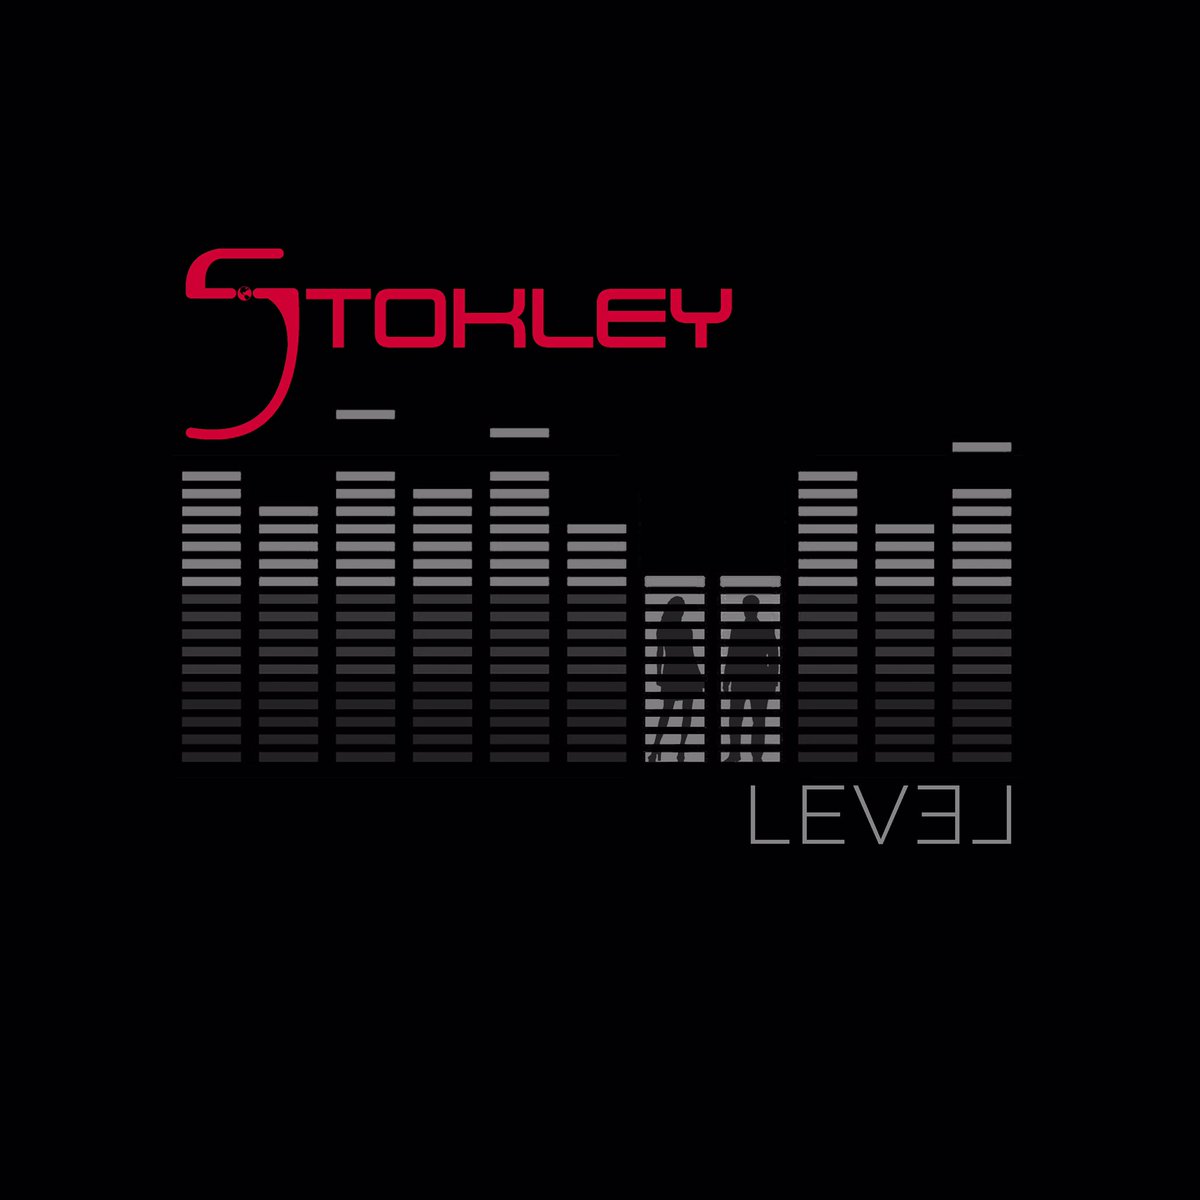 Stokely Williams Mint Condition Level